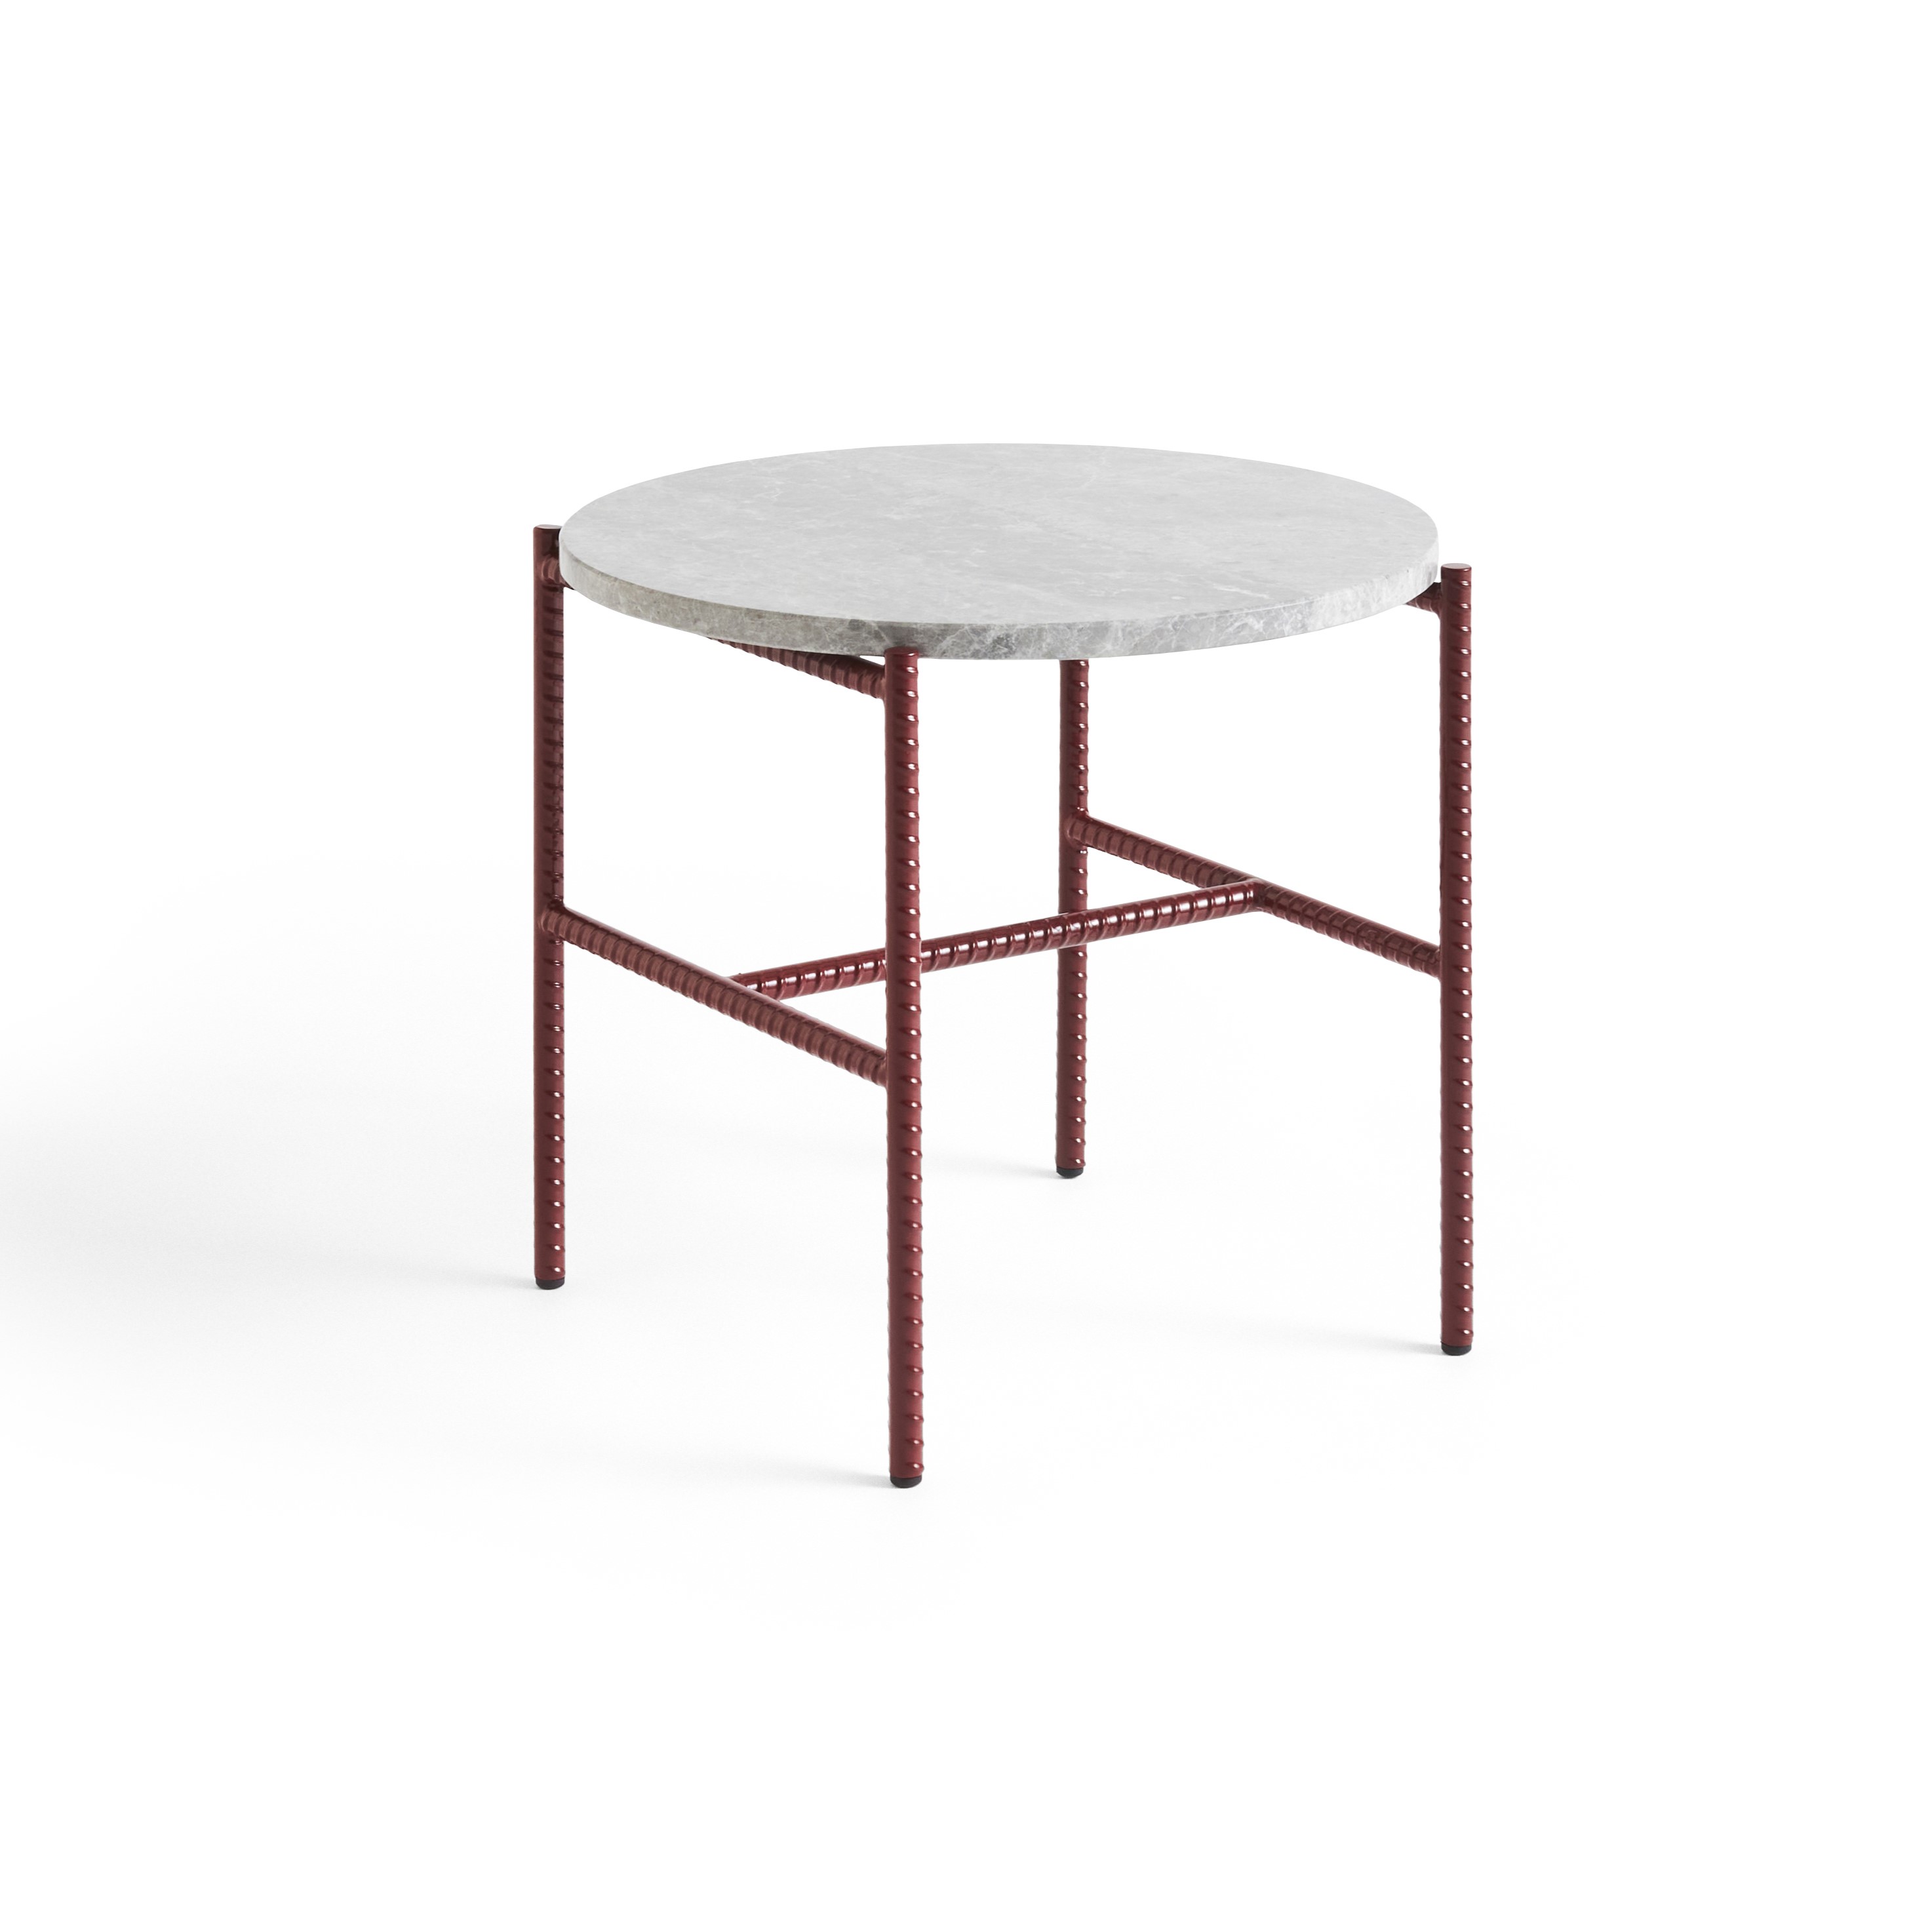 Rebar side table round - Grey marble top/Barn red